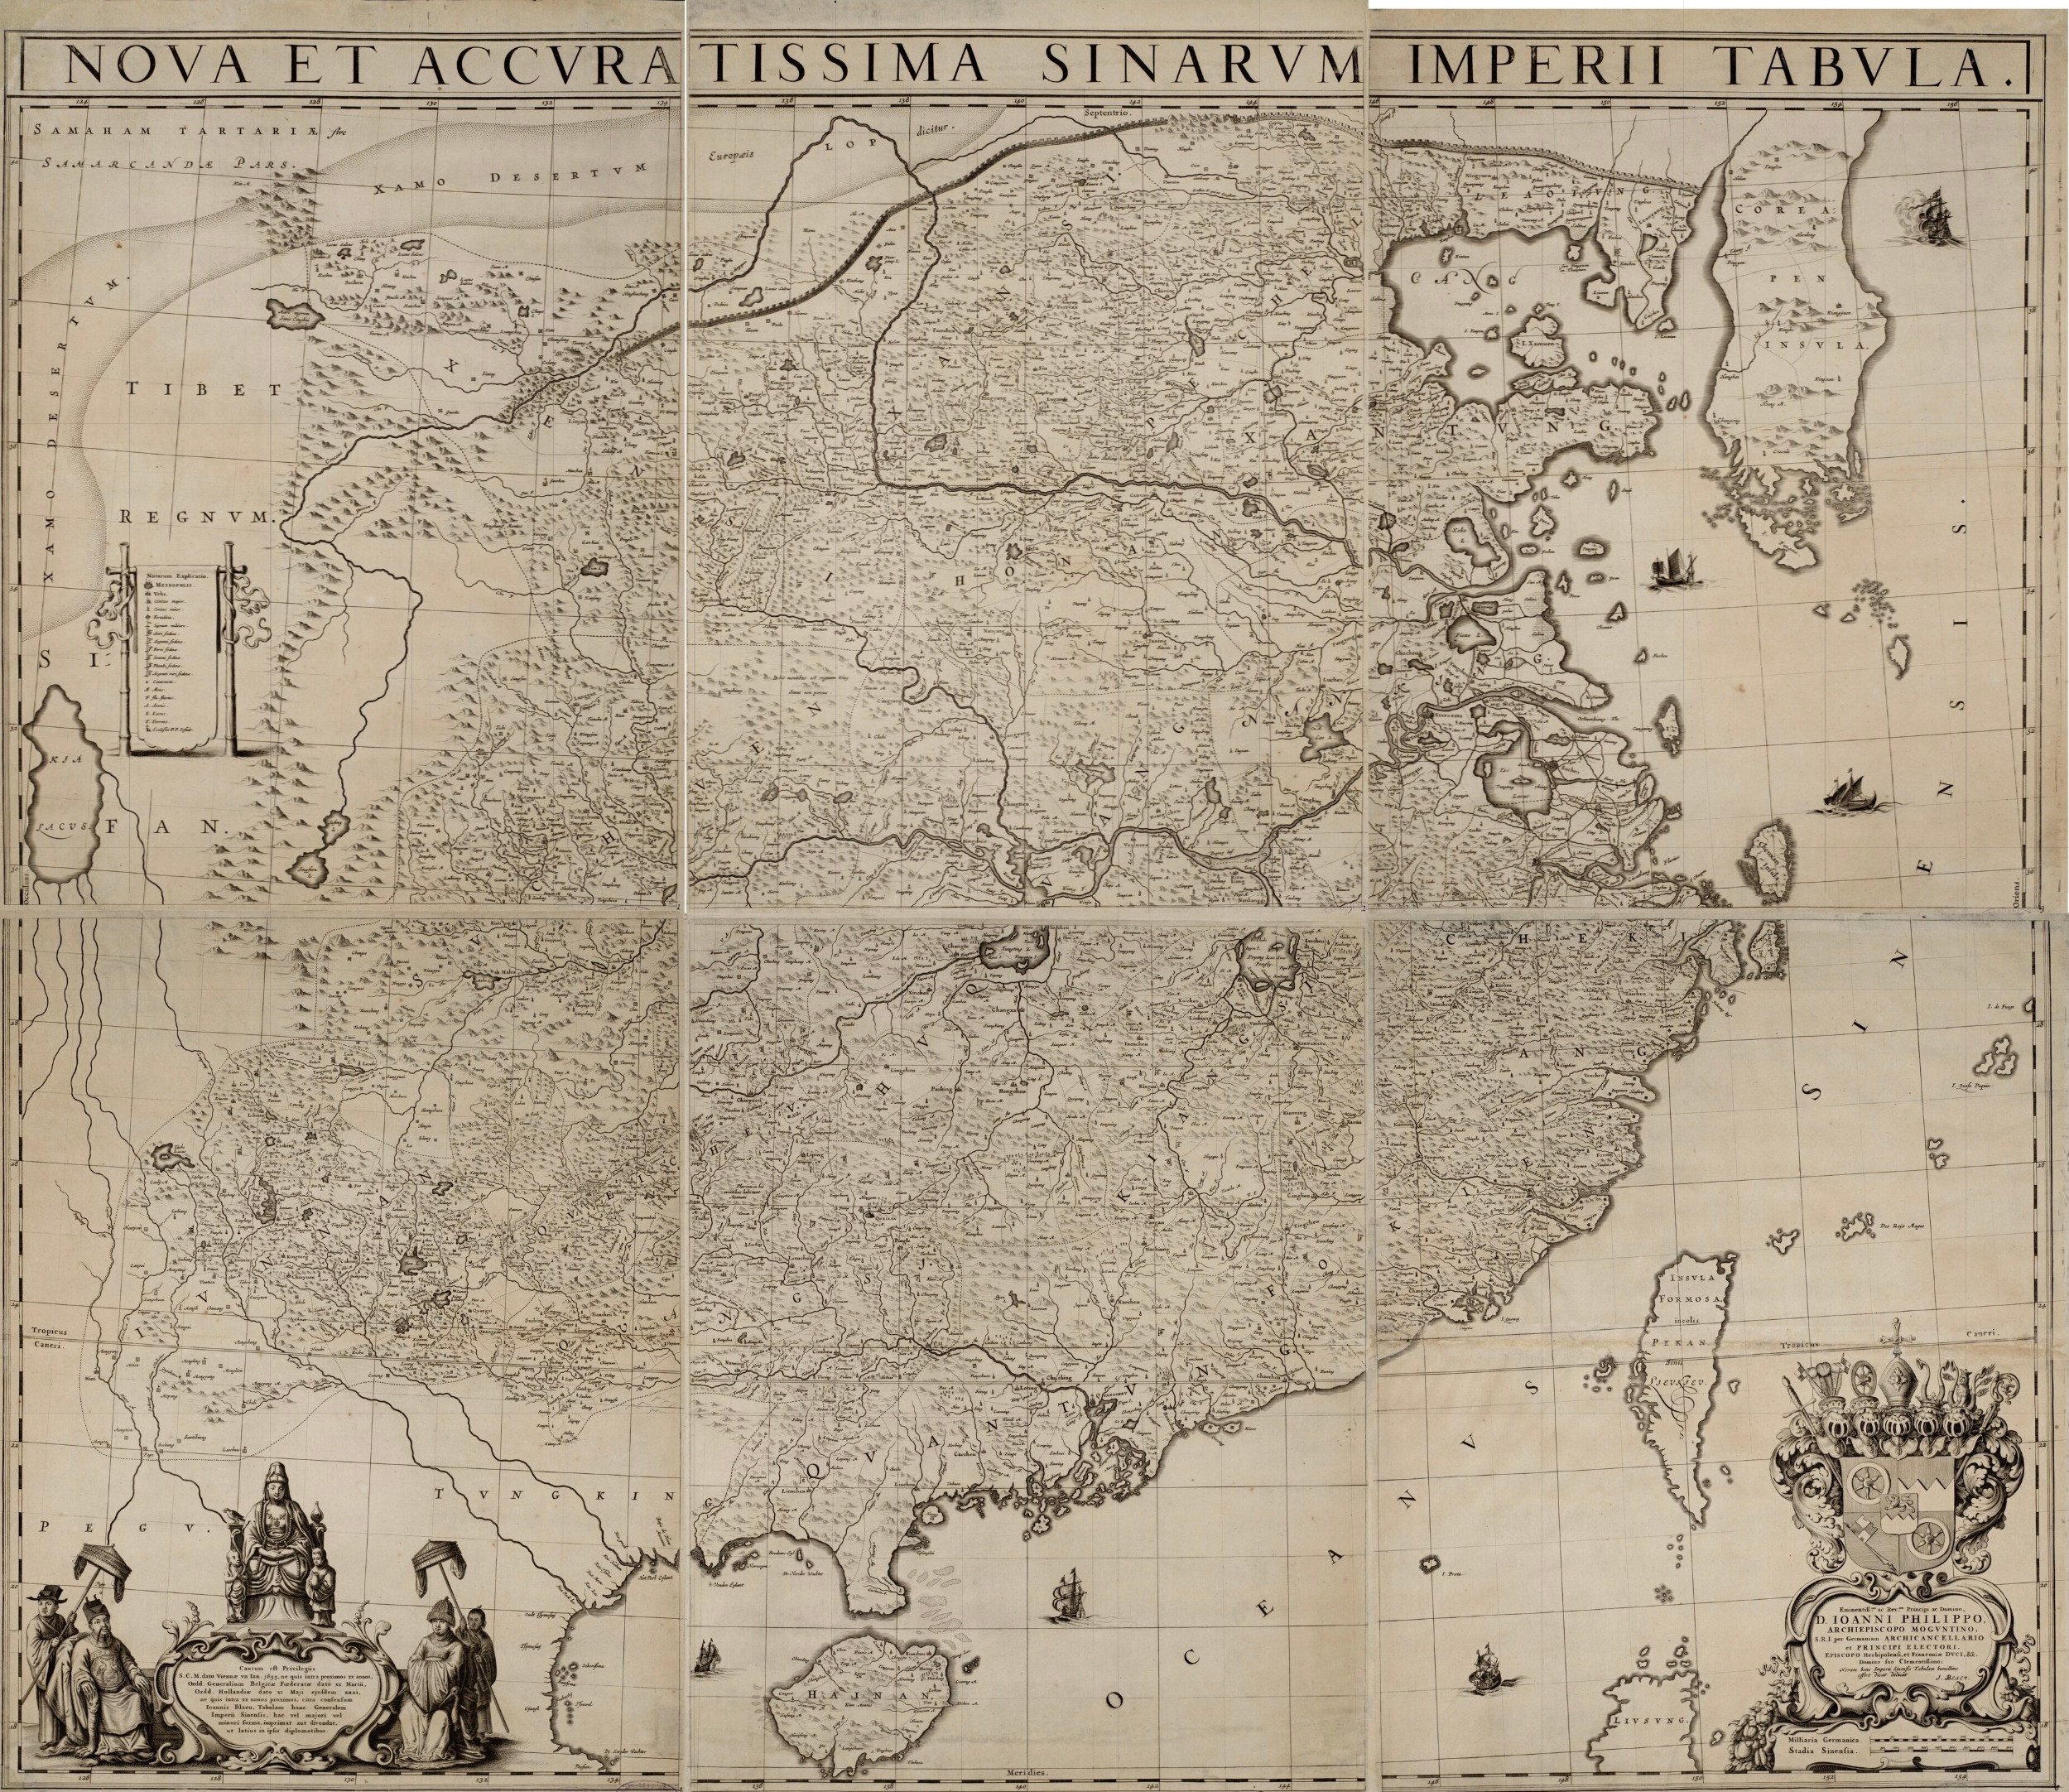 The map of the whole of China from Martino Martini’s Novus Atlas Sinensis, published in Amsterdam in 1655. A new compilation of 127 maps of China produced between 1584 and 1735 shows how mapmakers helped paint a – somewhat – accurate picture of China during this period.